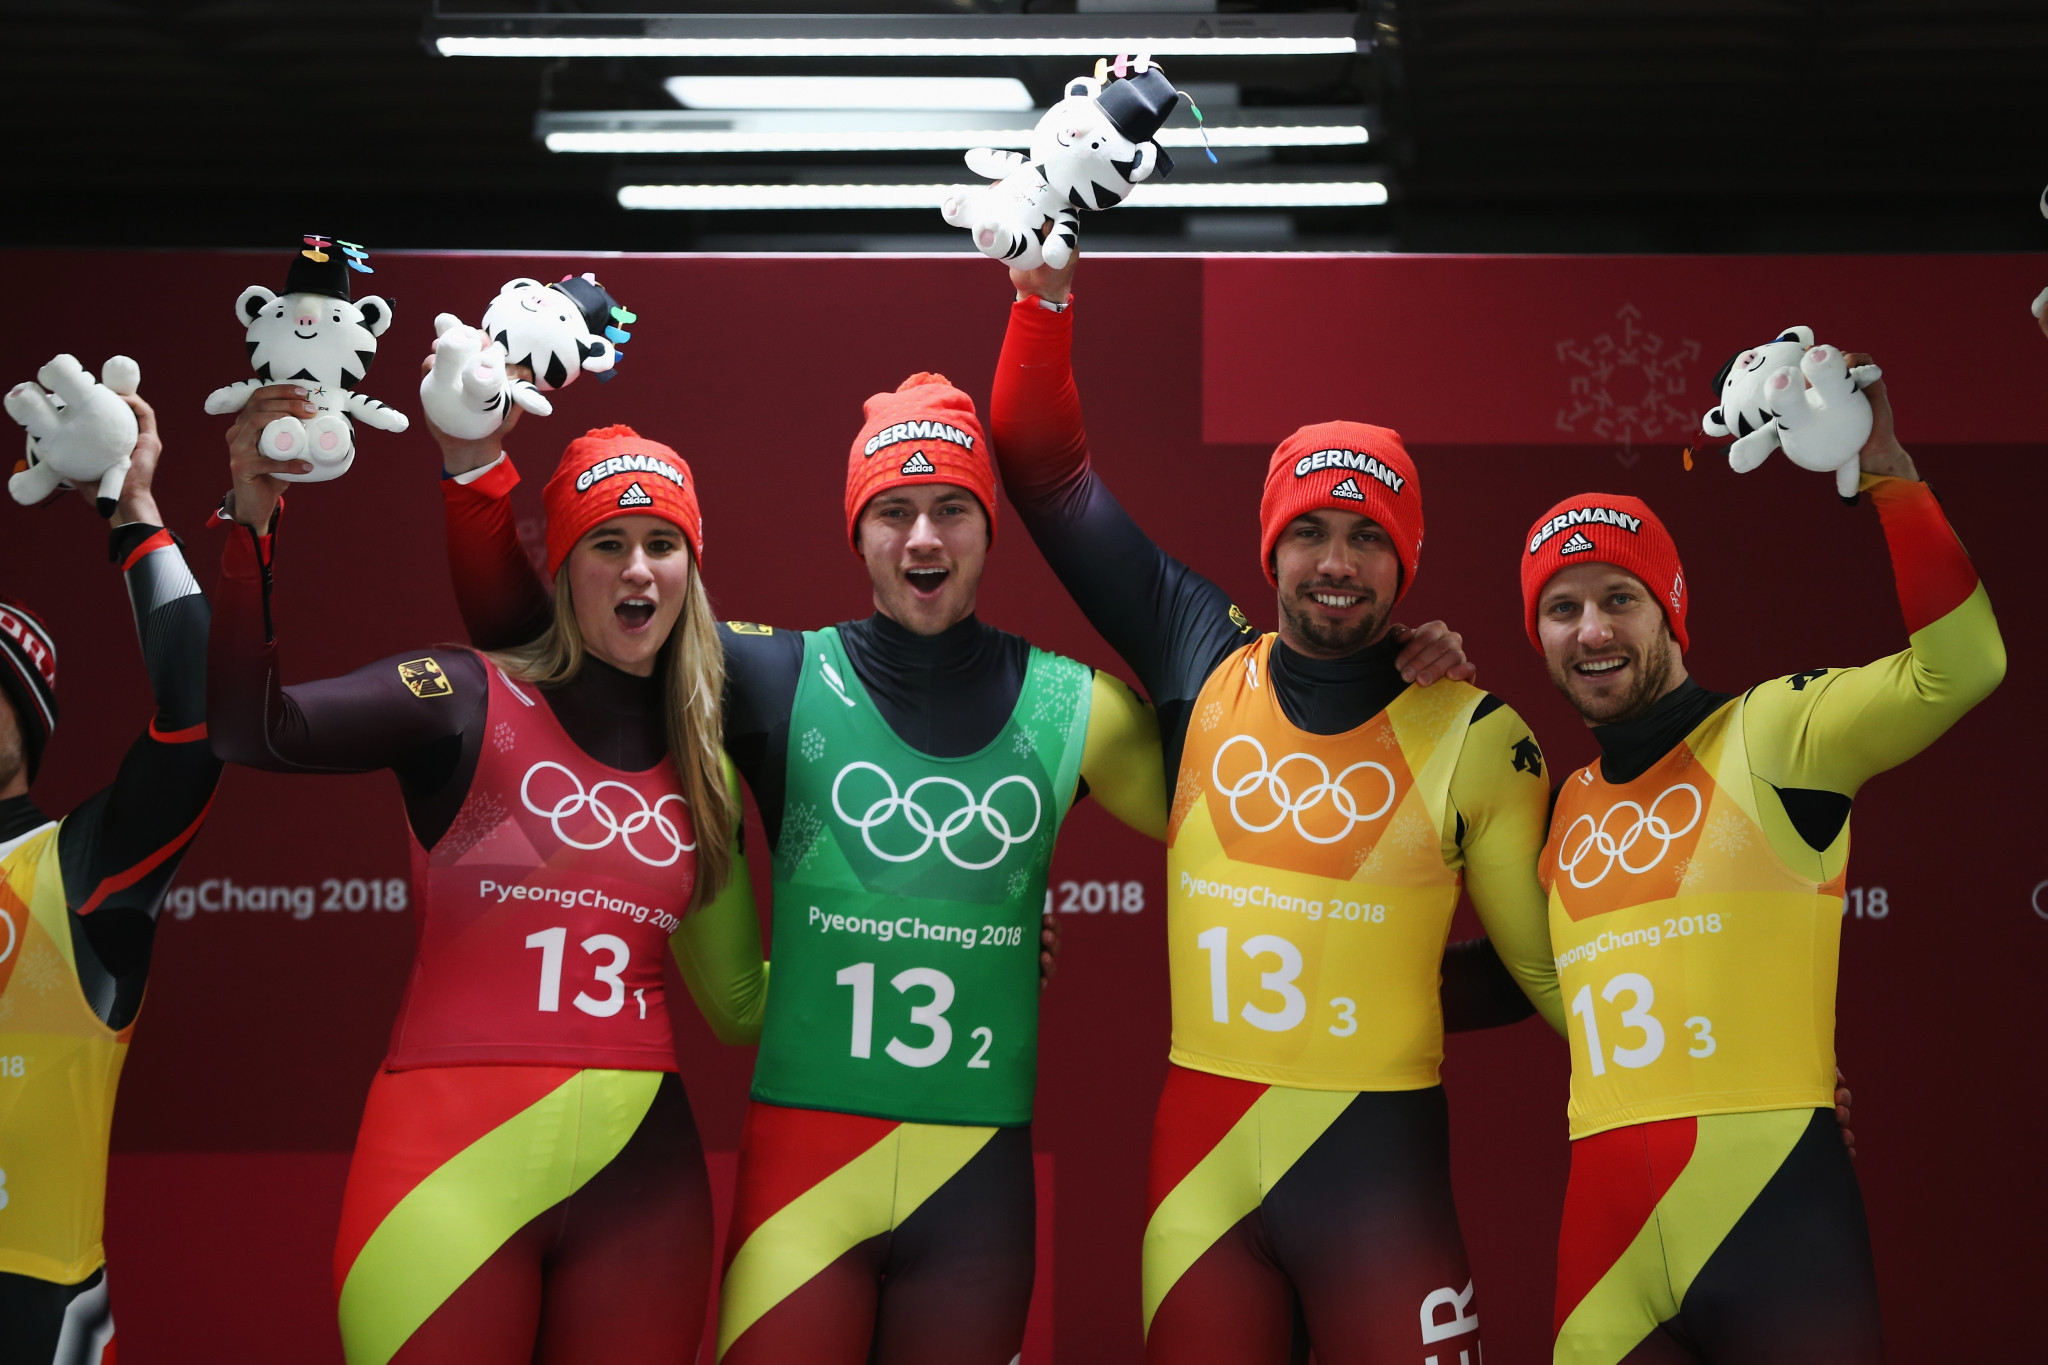 Germany close luge events at Pyeongchang 2018 with third gold medal out of four